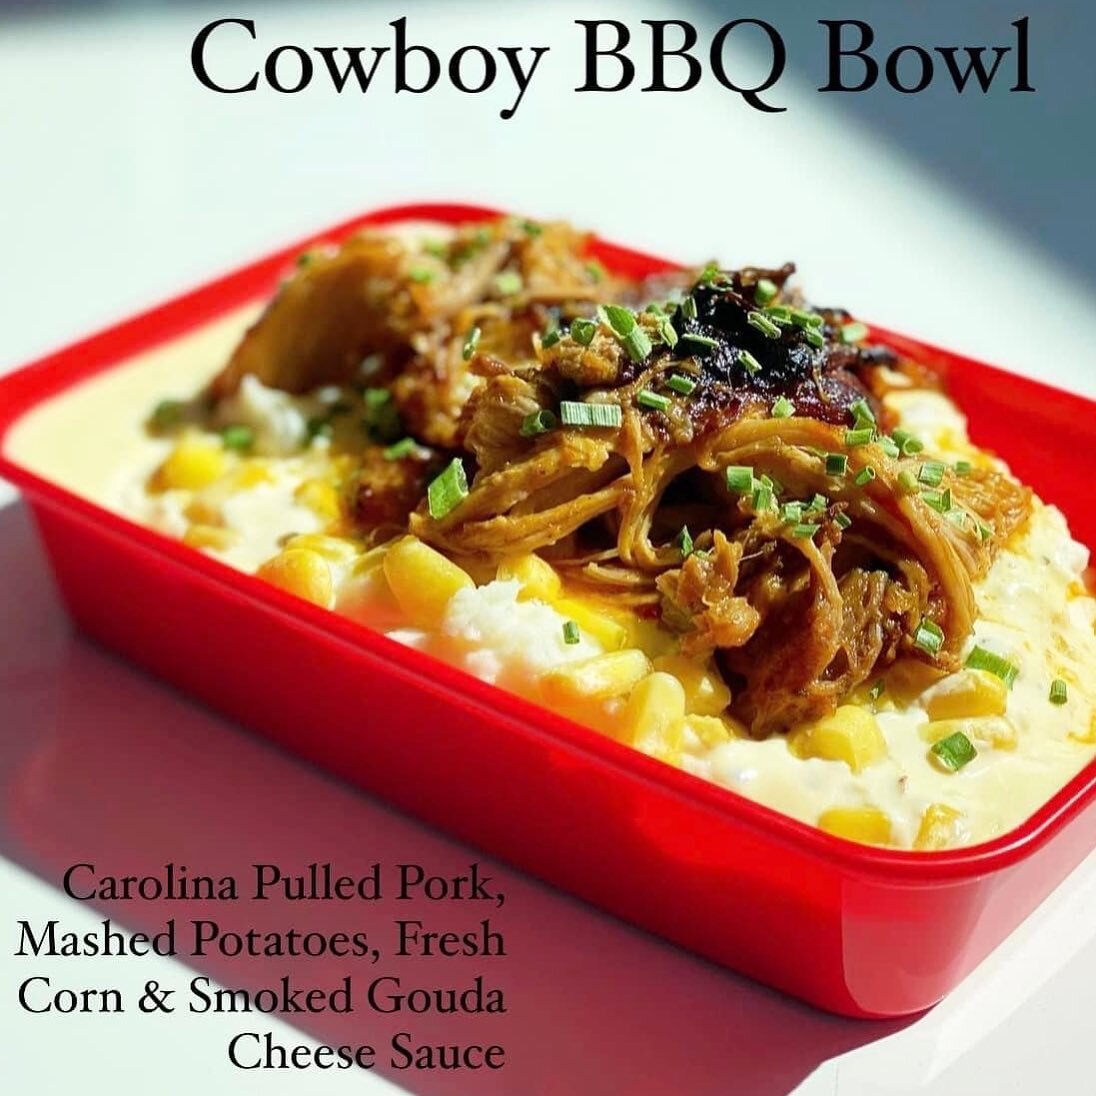 Hey hey hey...it&rsquo;s our Cowboy BBQ Bowl!! Lunch or dinner is about to be amazing! Grab one for yourself today!! 🤠 

#tulsaeats #reedertulsa #foodie #grabandgo #freshtoconvenience #eatwell #dinner #lunch #meals #food #eattulsa #gasstationfood #b